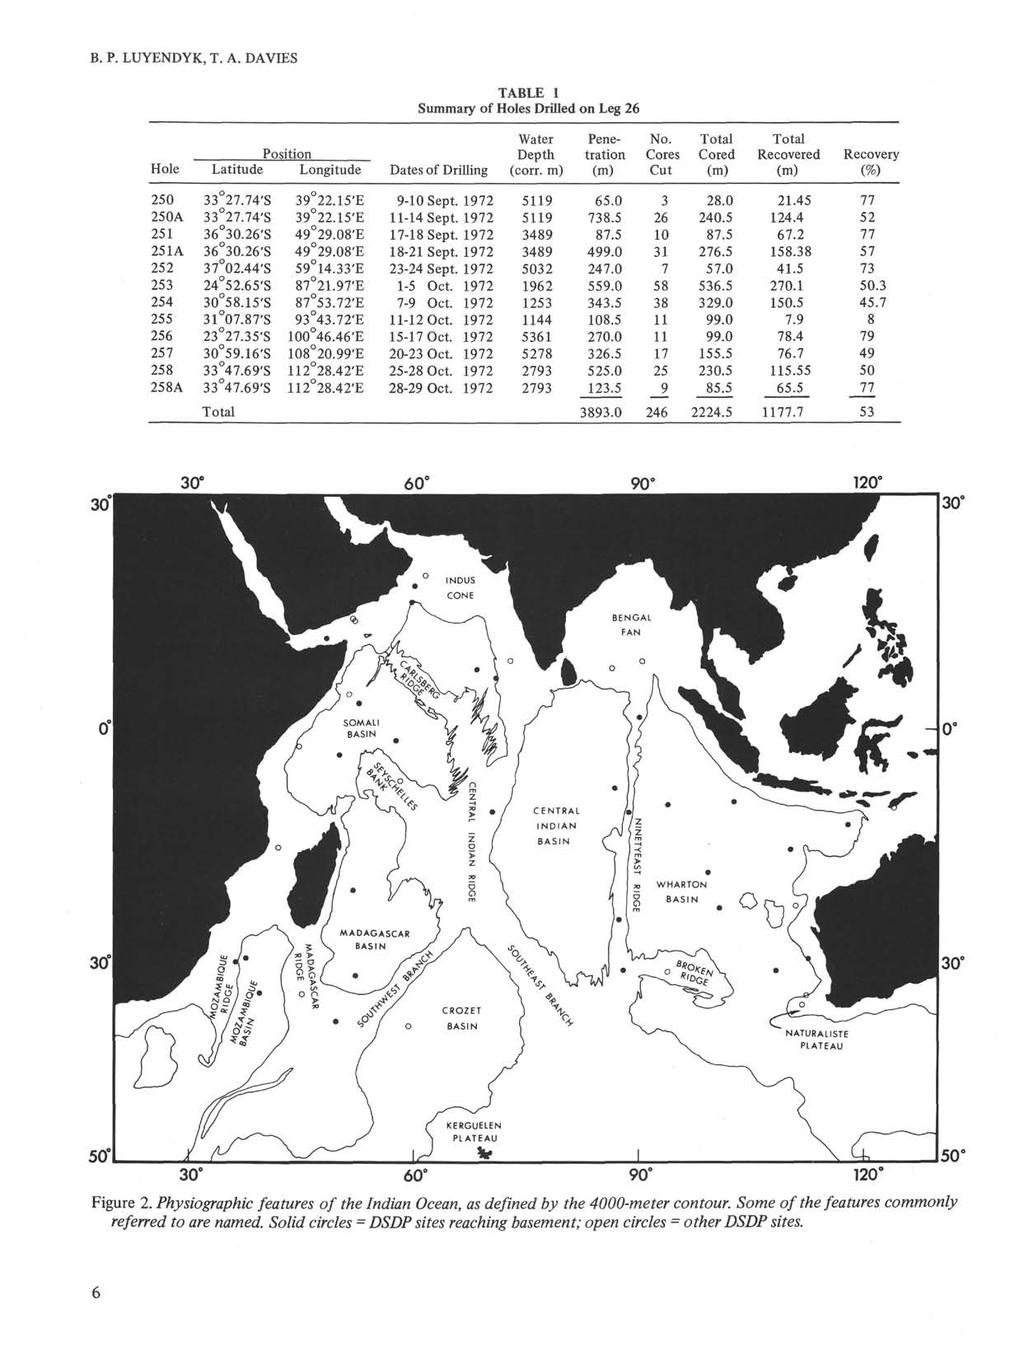 B. P. LUYENDYK, T. A. DA VIES TABLE 1 Summary of Holes Drilled on Leg 26 Hole Position Latitude Longitude Dates of Drilling Water Depth (corr. m) Penetration No.